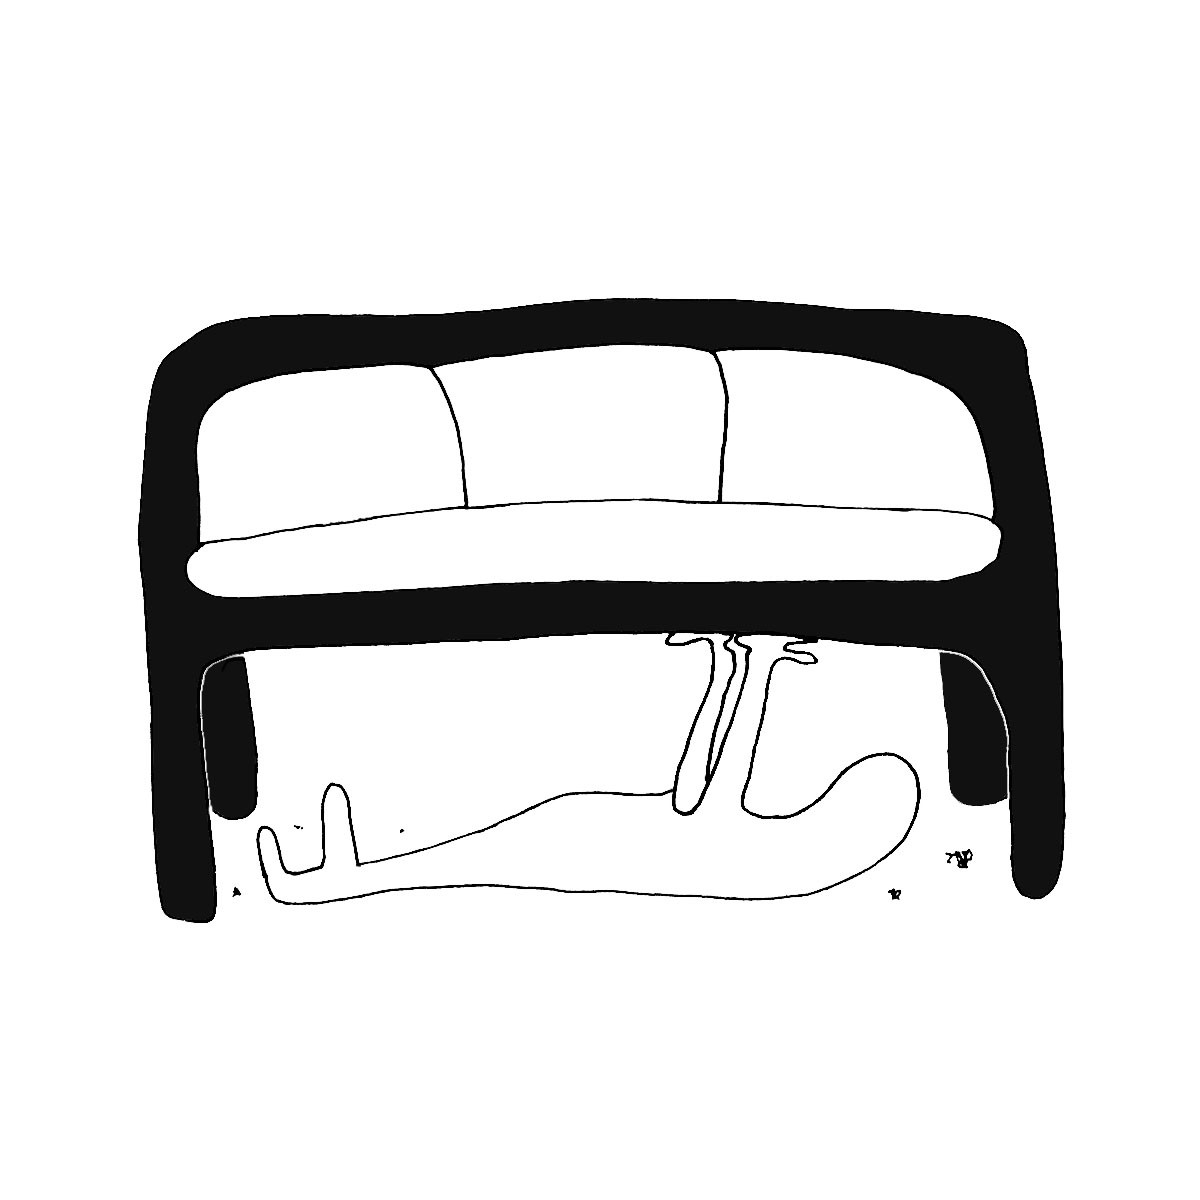 Drawing of figure lying under couch by Leah Feuer